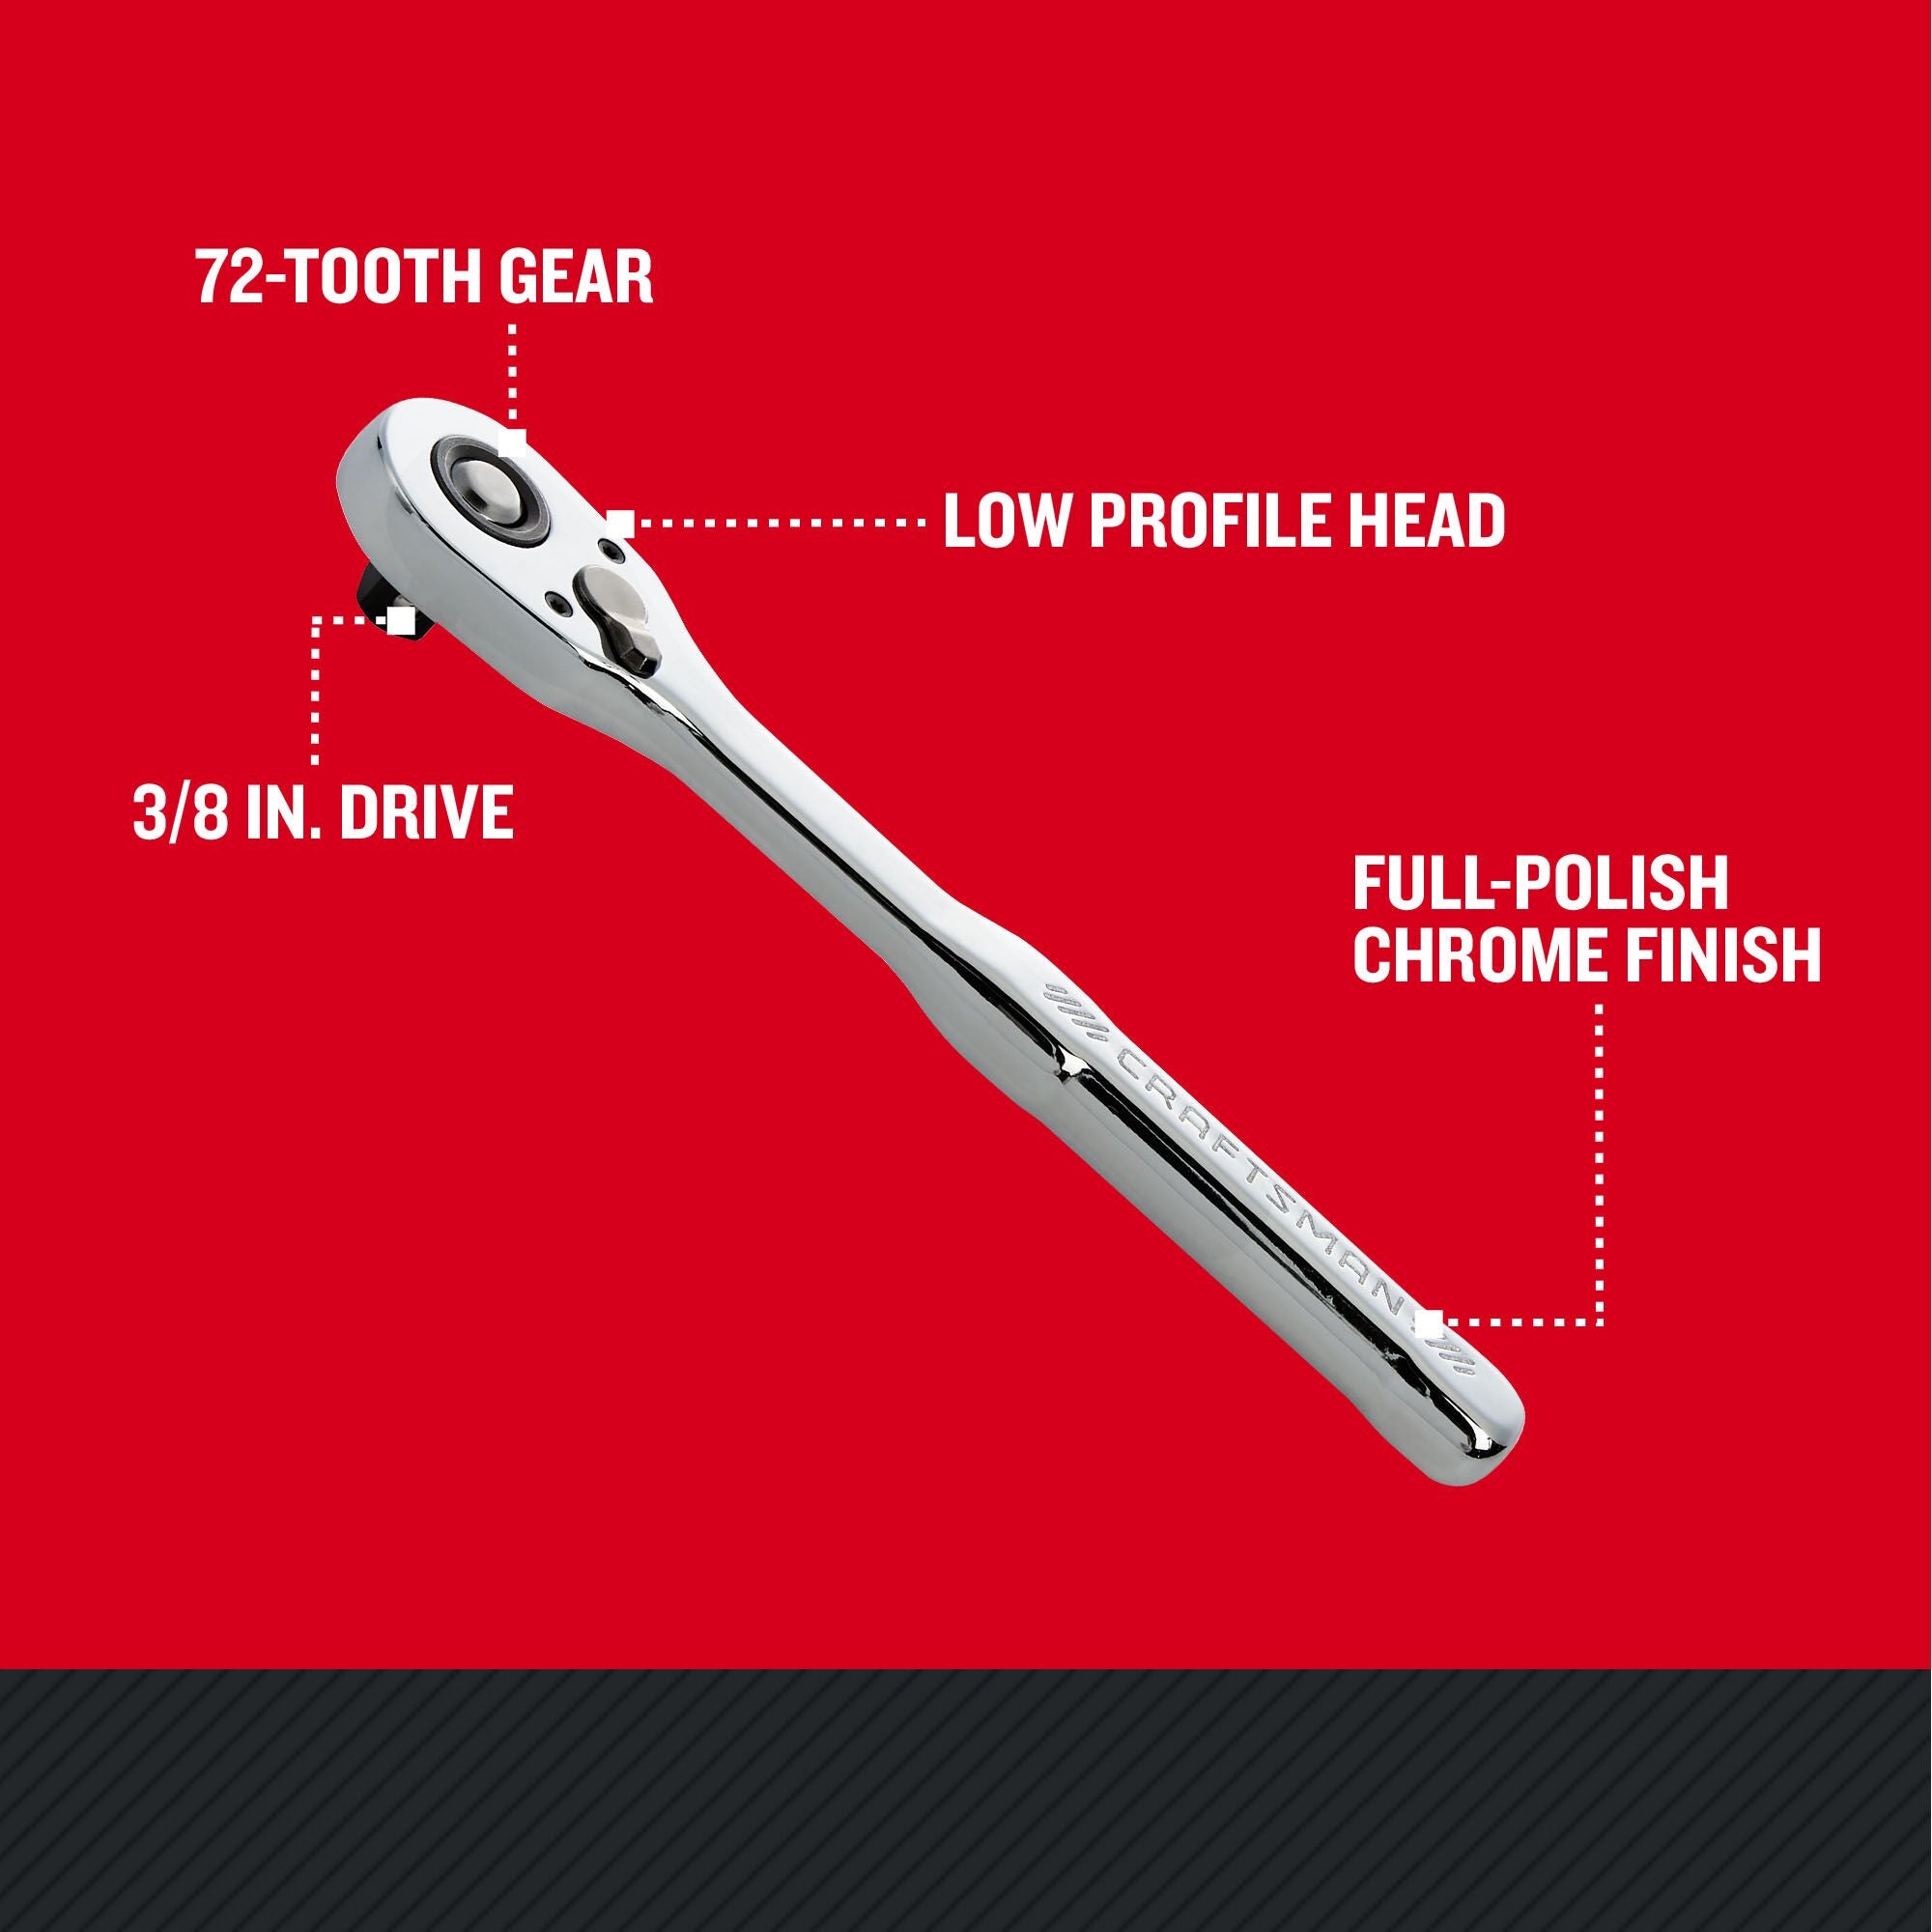 CRAFTSMAN Low Profile 3/8IN DRIVE 72 TOOTH PEAR HEAD RATCHET with features and benefits highlighted